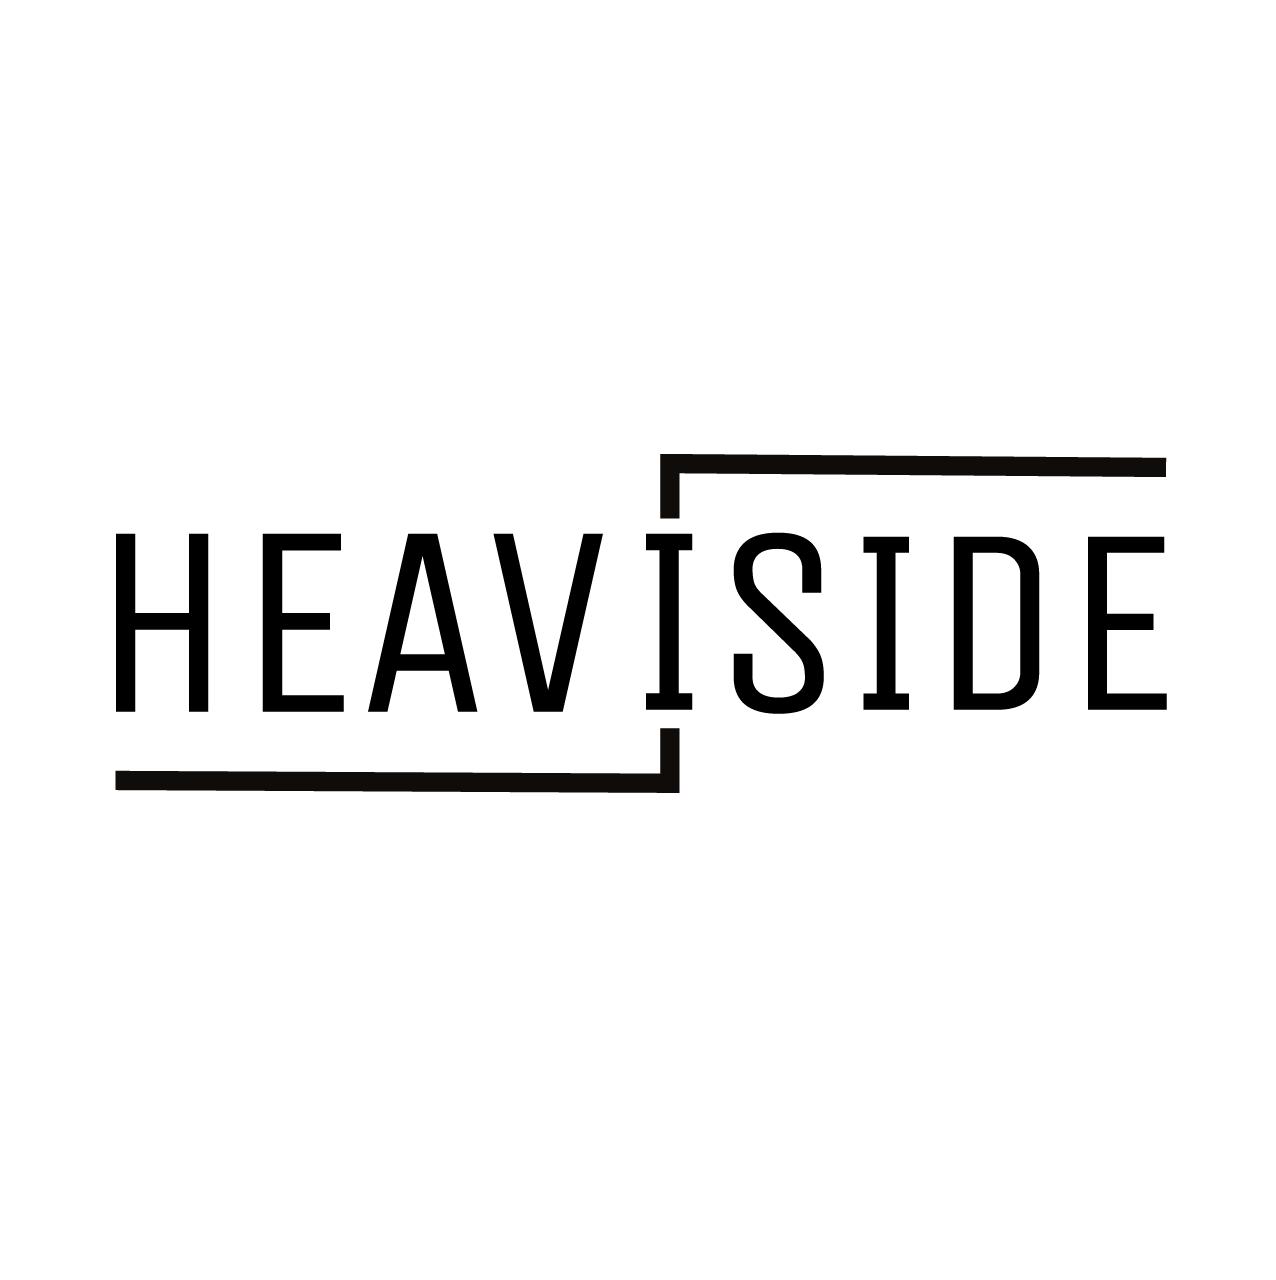 Heaviside Group profile on Qualified.One